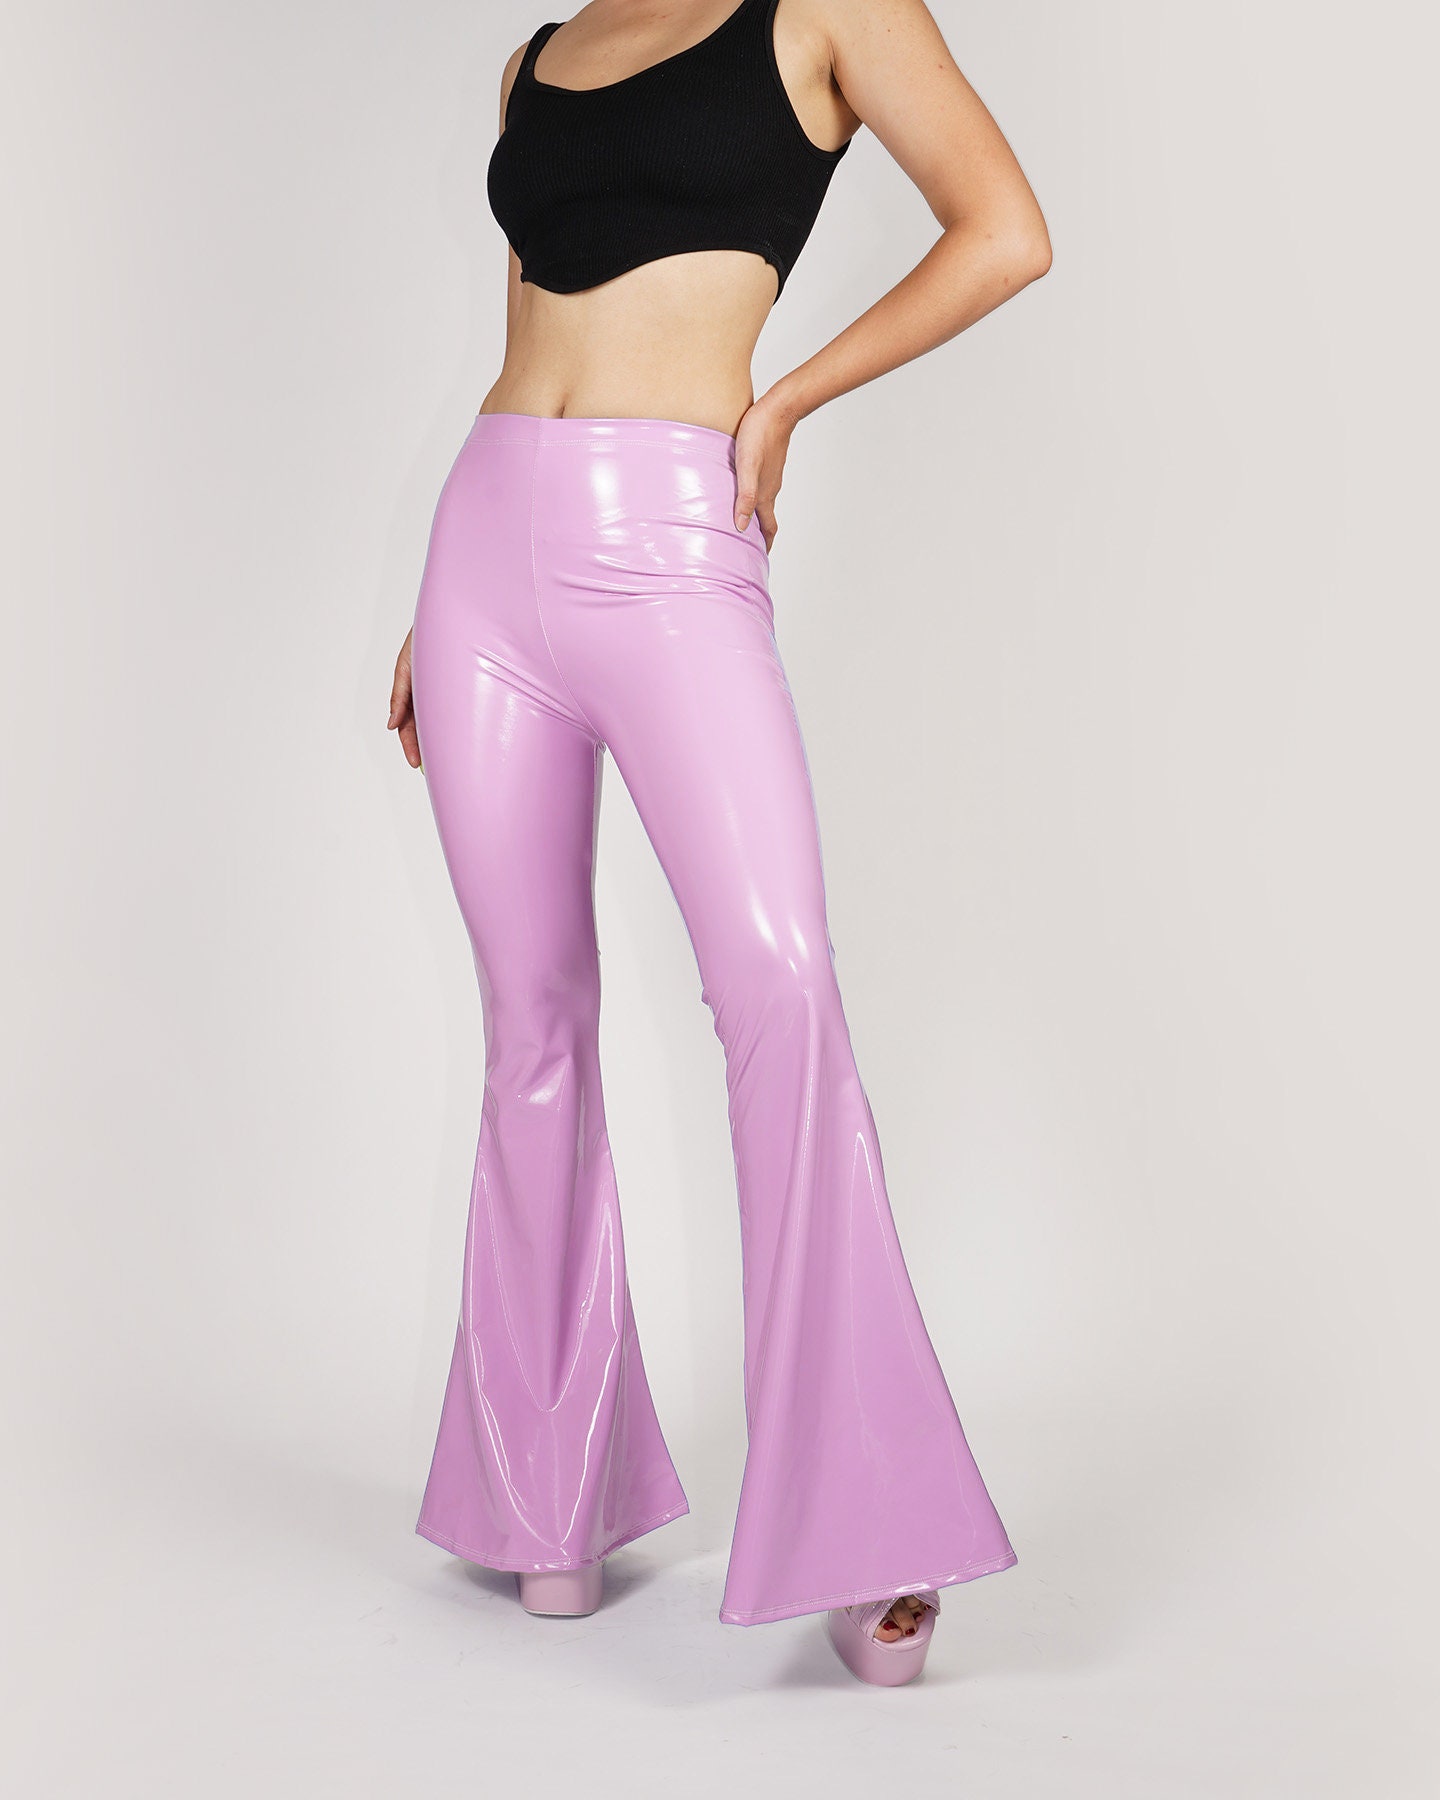 PINKPHOENIXFLY Womens Sexy Shiny Faux Leather Leggings Pants (S, Purple) :  : Clothing, Shoes & Accessories